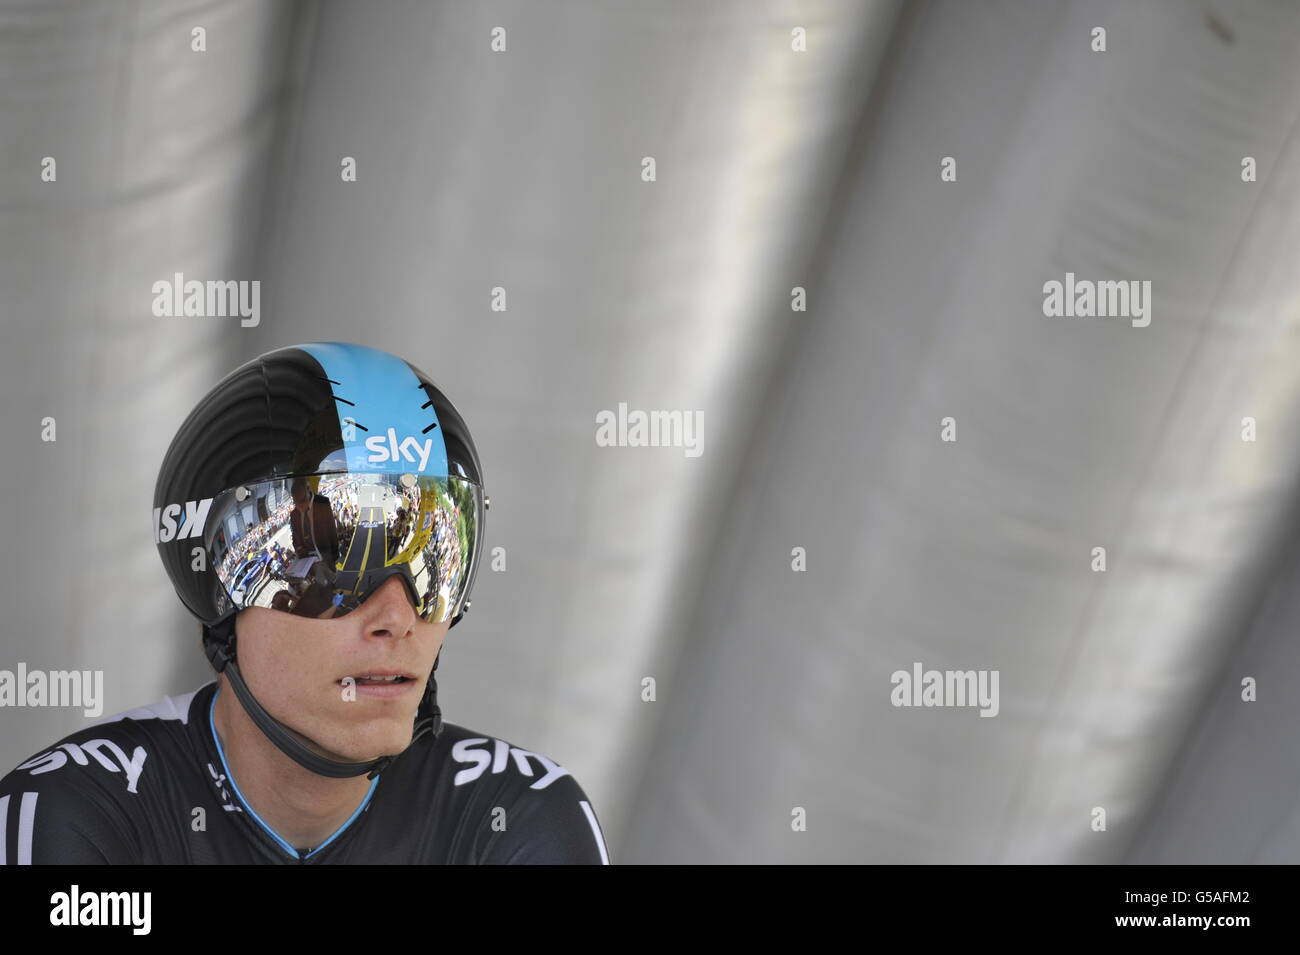 Team Sky's Christian Knees during the Prologue Stage of the 2012 Tour de France in Liege, Belgium. Stock Photo